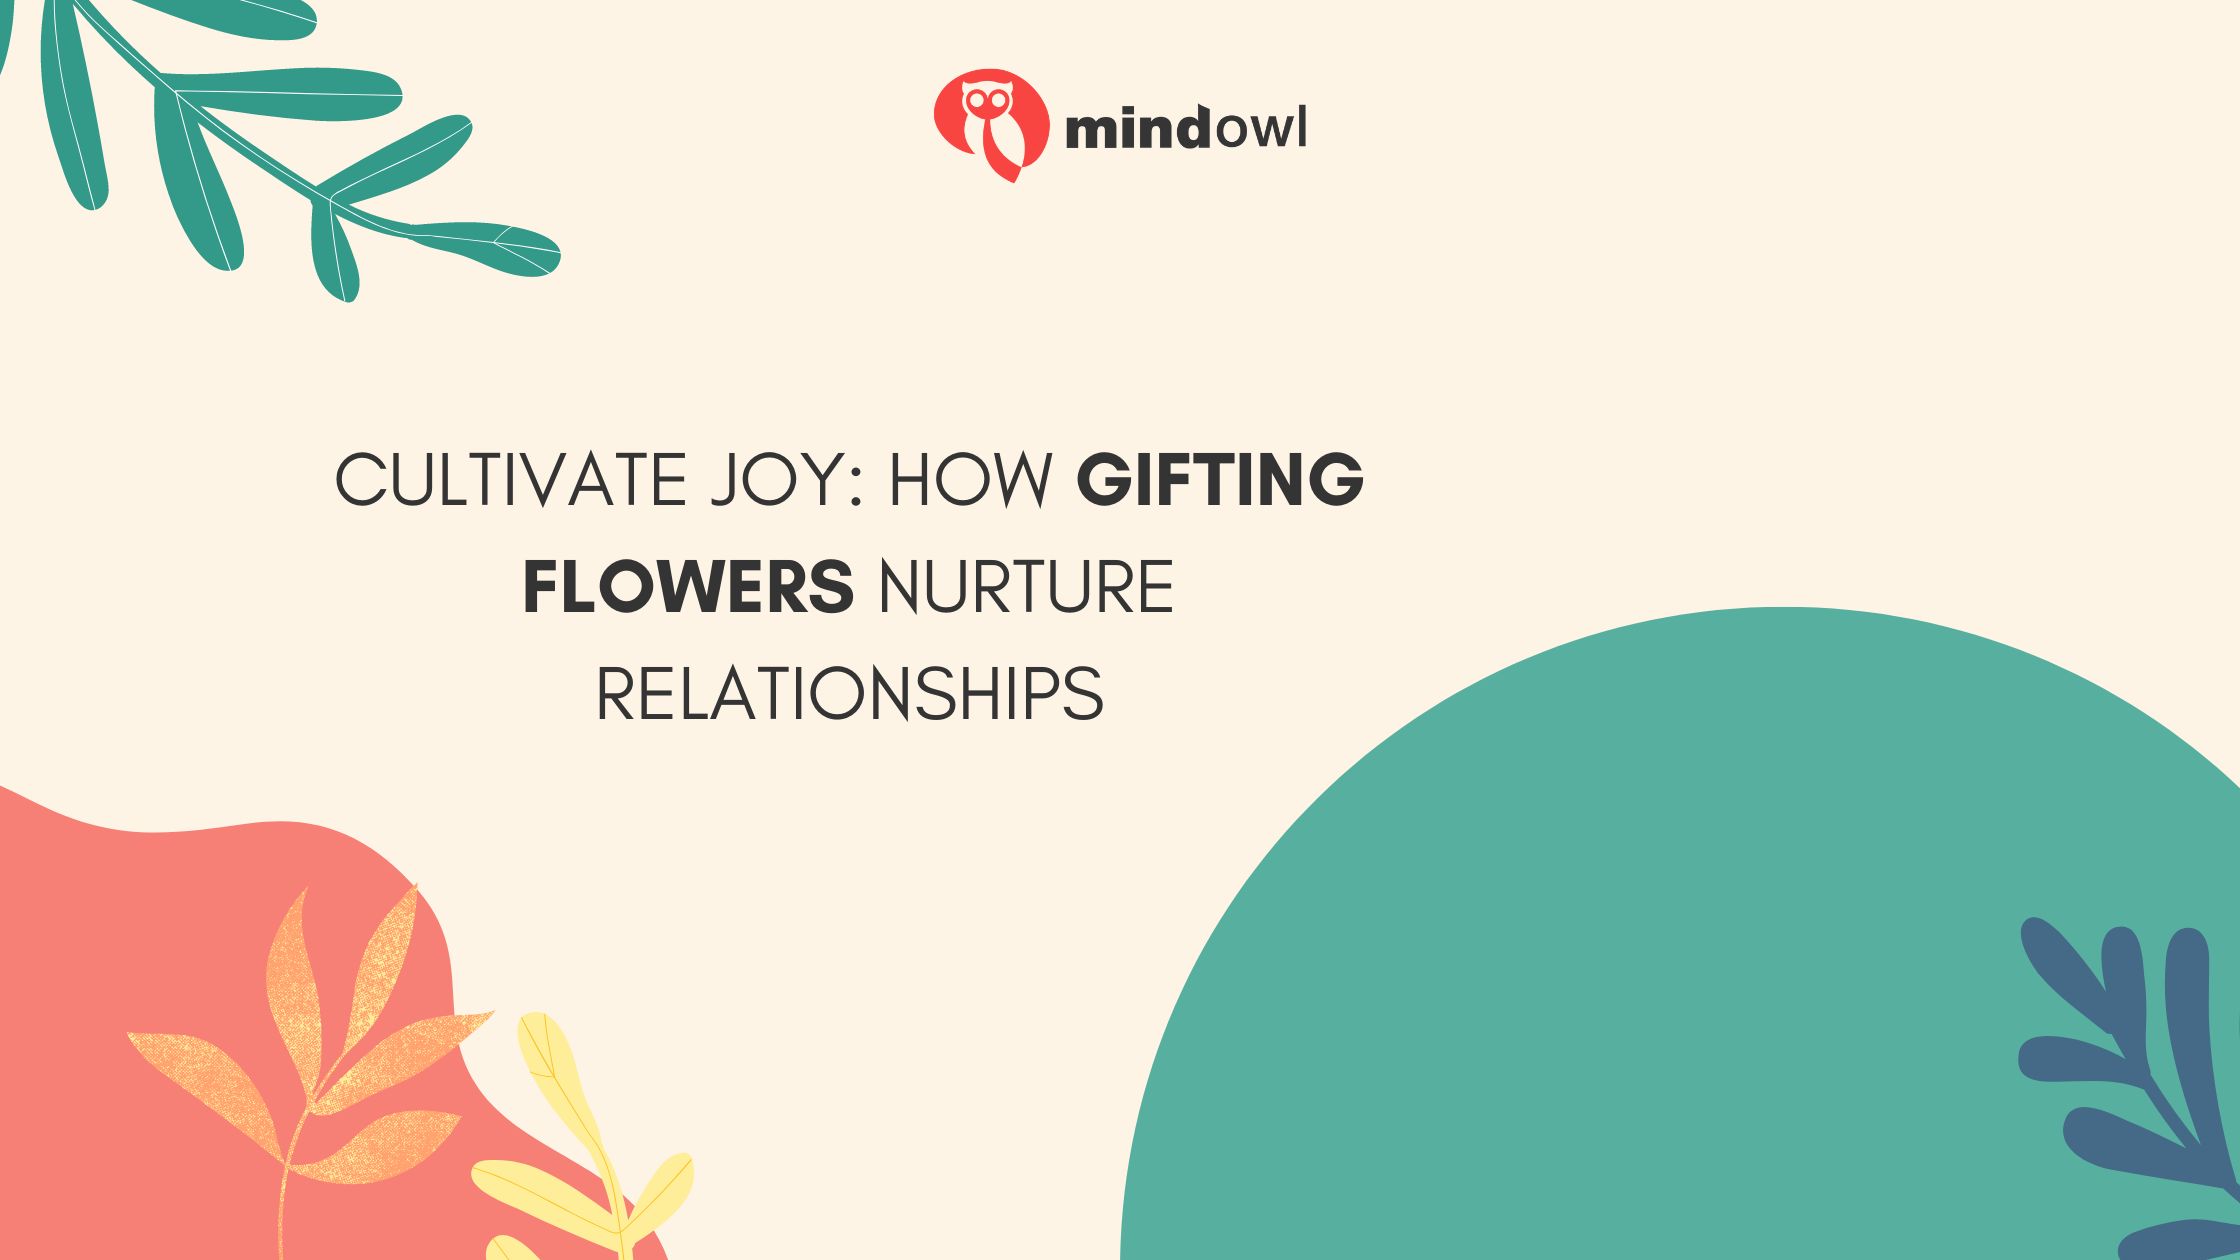 Cultivate Joy: How Gifting Flowers Nurture Relationships